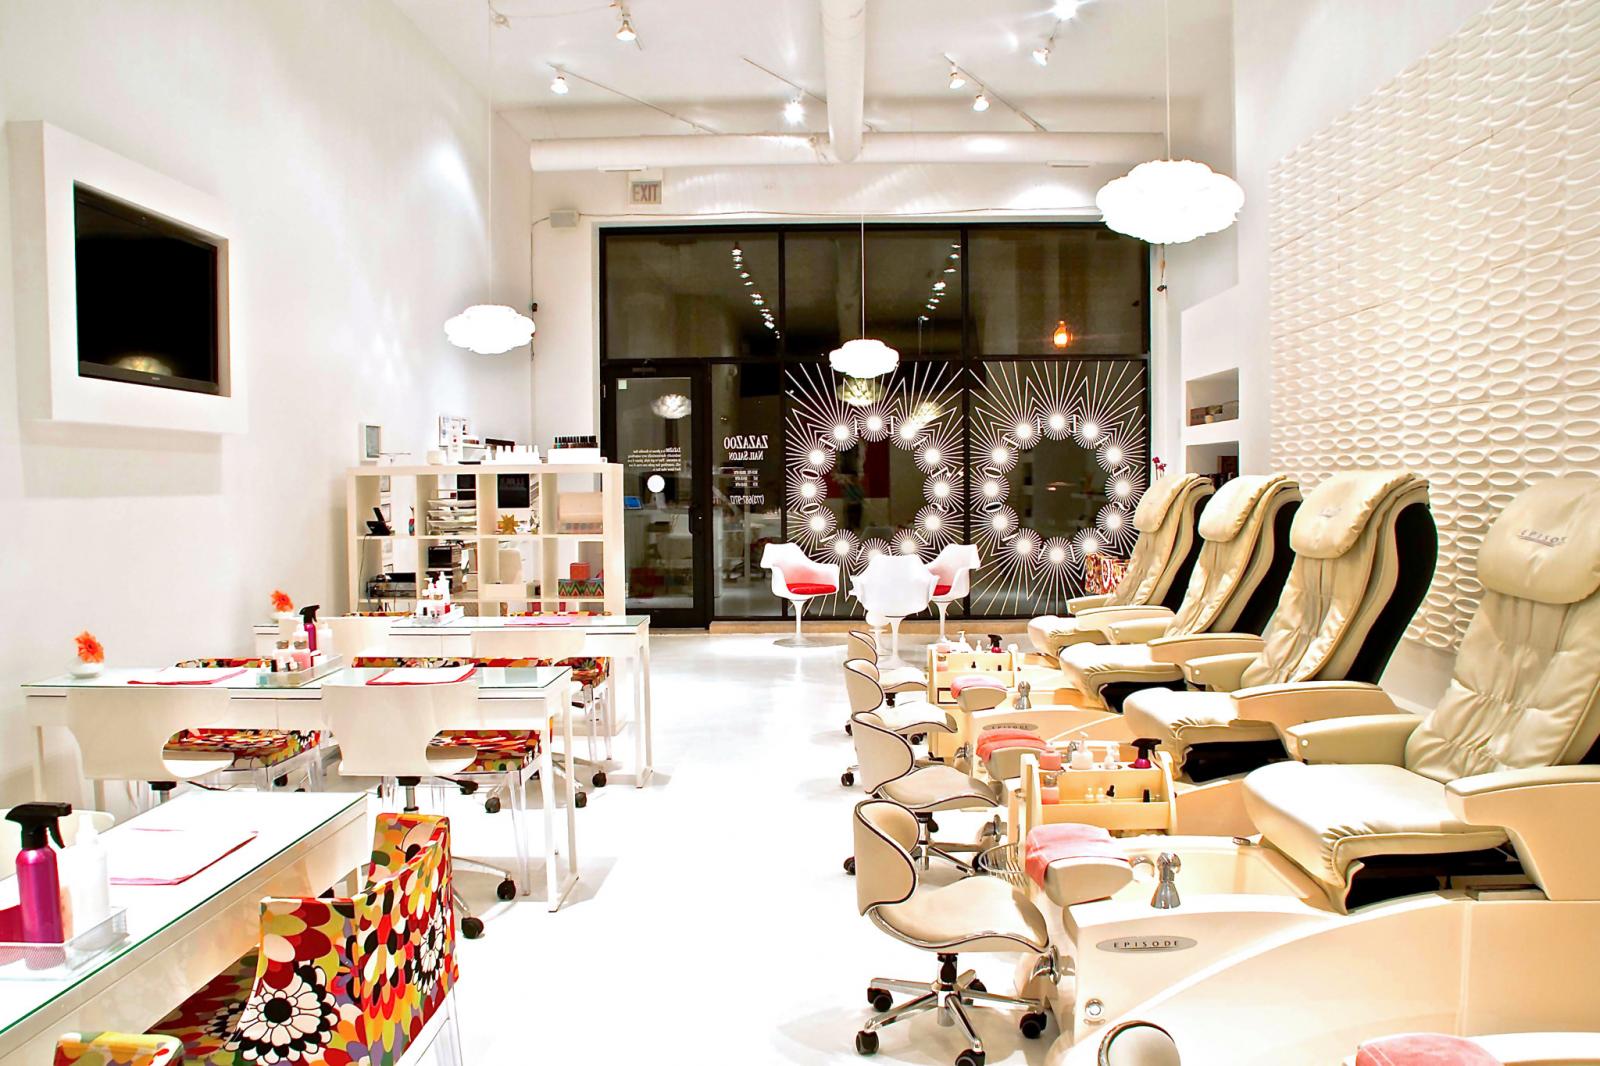 6. The Nail Spa - wide 6